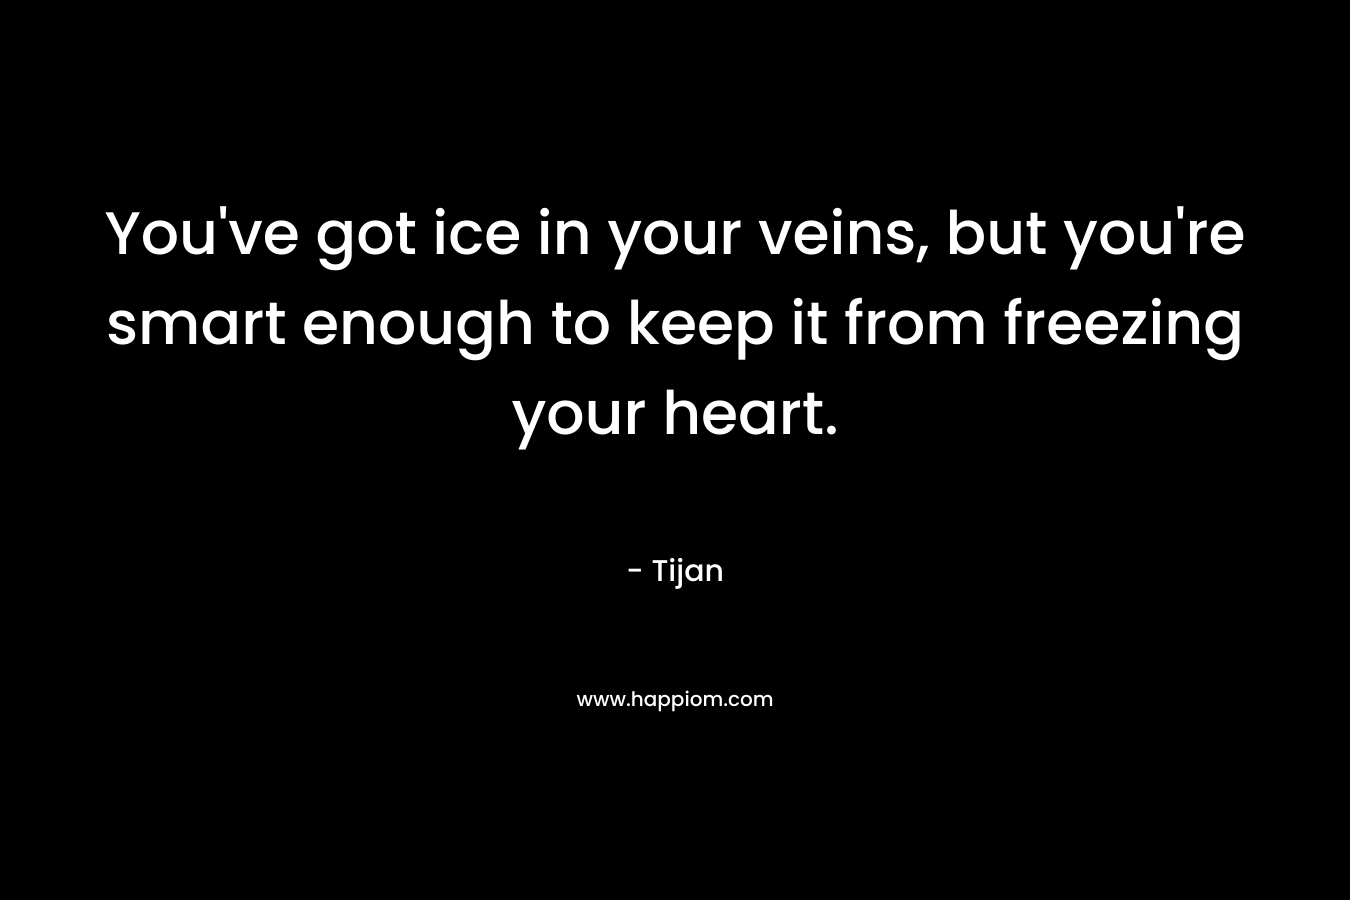 You’ve got ice in your veins, but you’re smart enough to keep it from freezing your heart. – Tijan